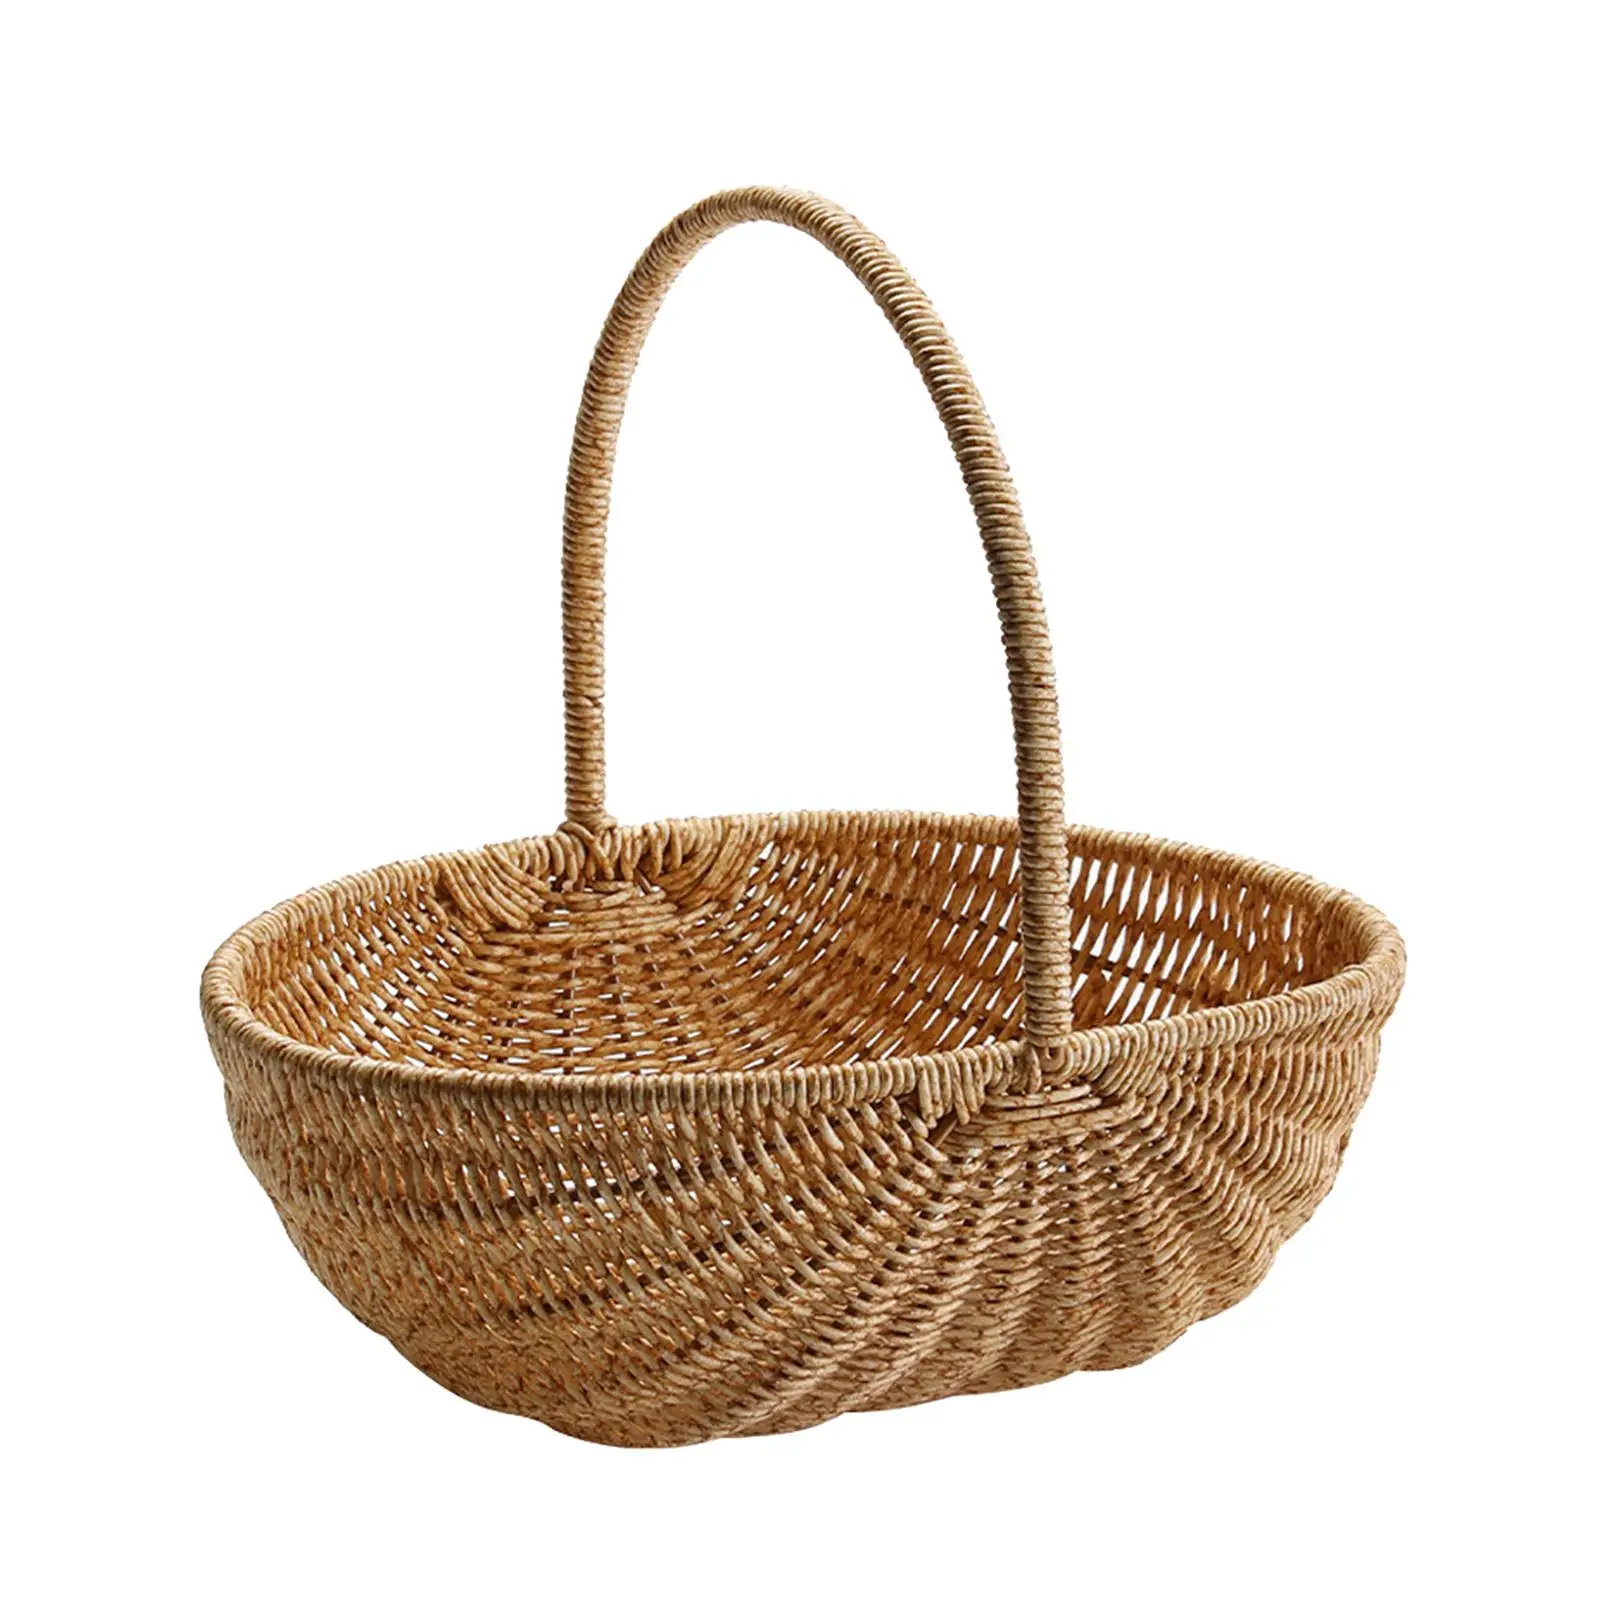 Woven Woven Basket Decoration Organizer Containers Picnic Sundries Fruits